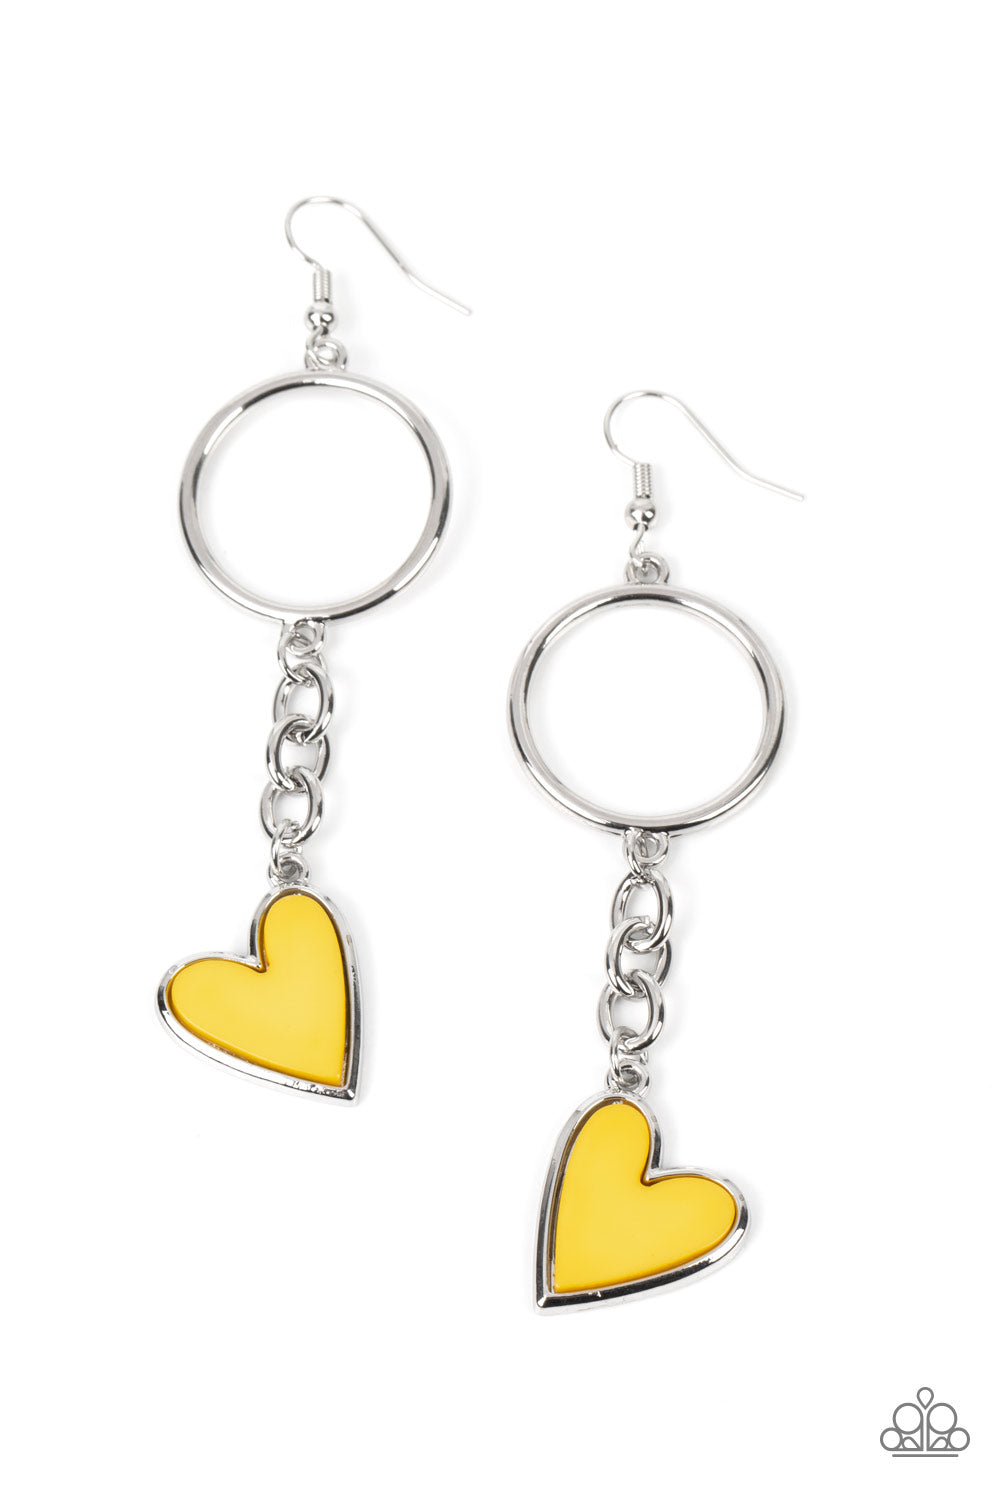 Don’t Miss a HEARTBEAT Yellow Heart Necklace Paparazzi Accessories. #P5WH-YWXX-185XX